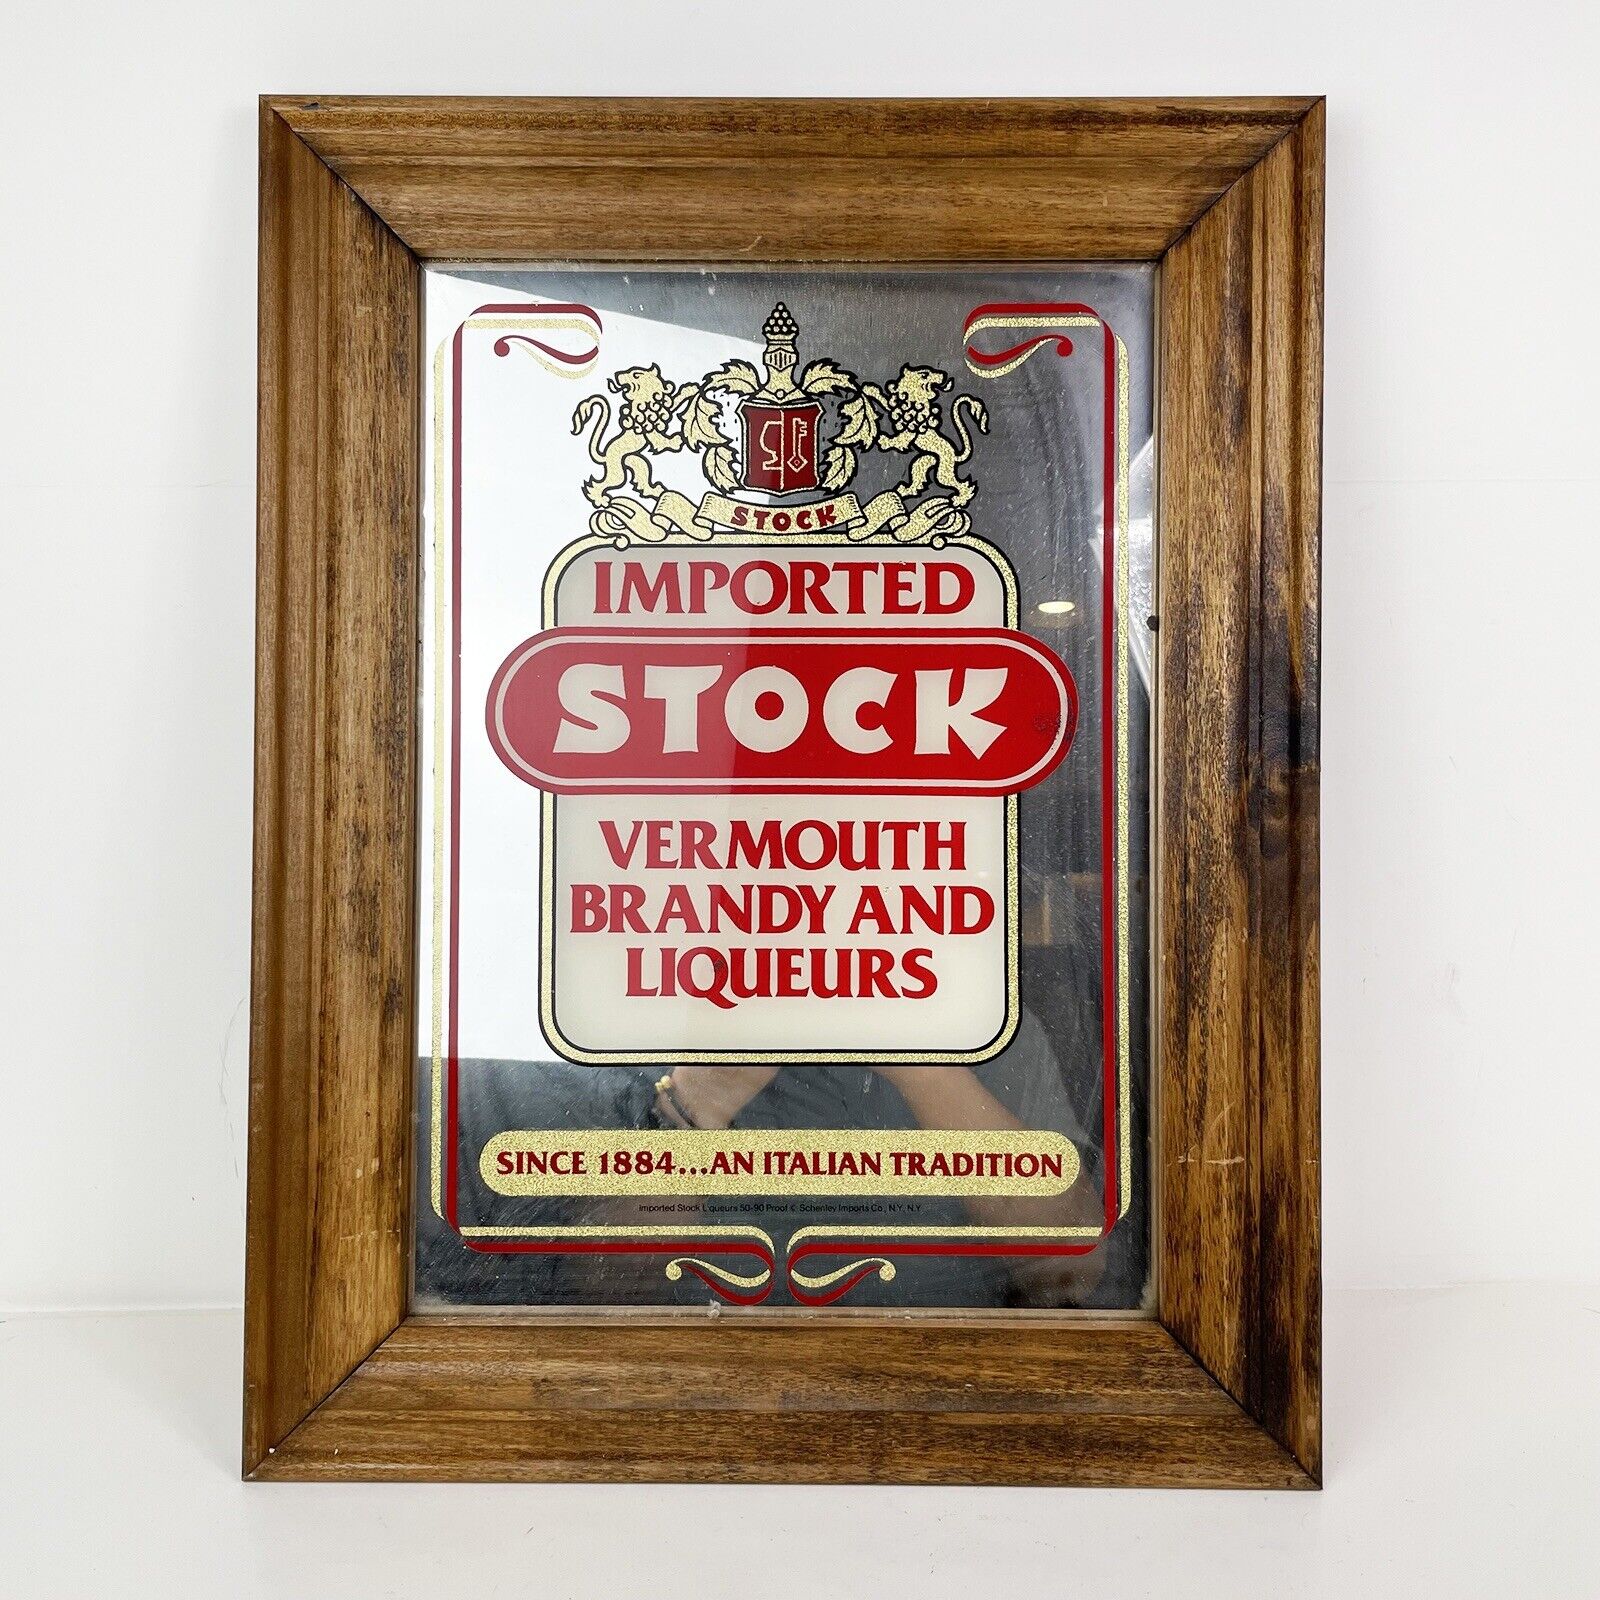 Imported Stock Vermouth Brandy Liqueurs Vintage Bar Mirror Wood Framed 14x18”